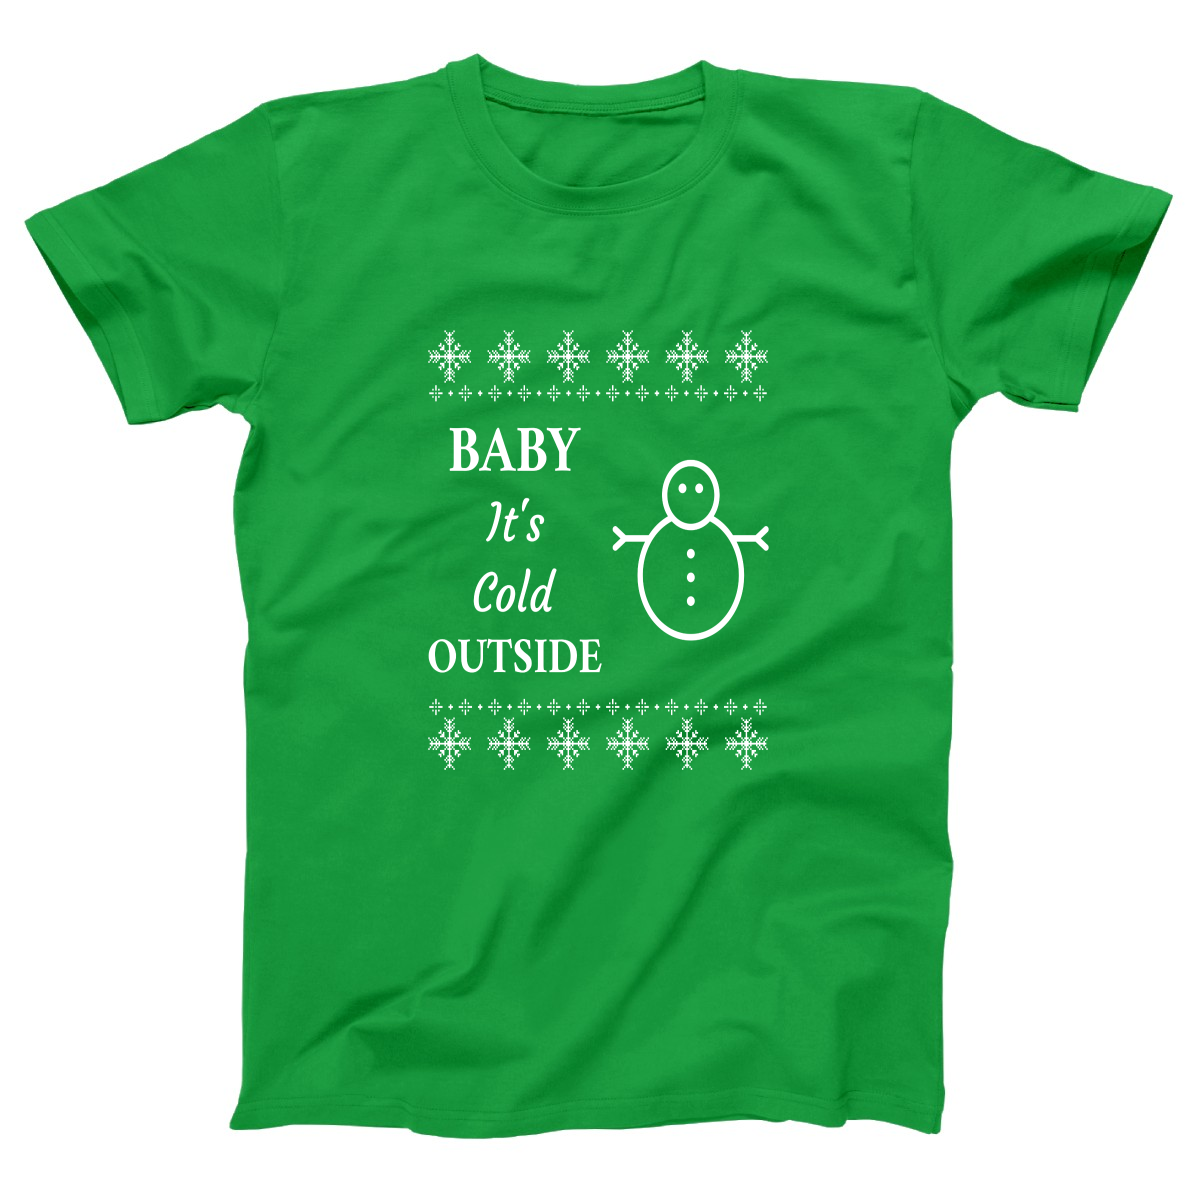 Baby It's Cold Outside Women's T-shirt | Green